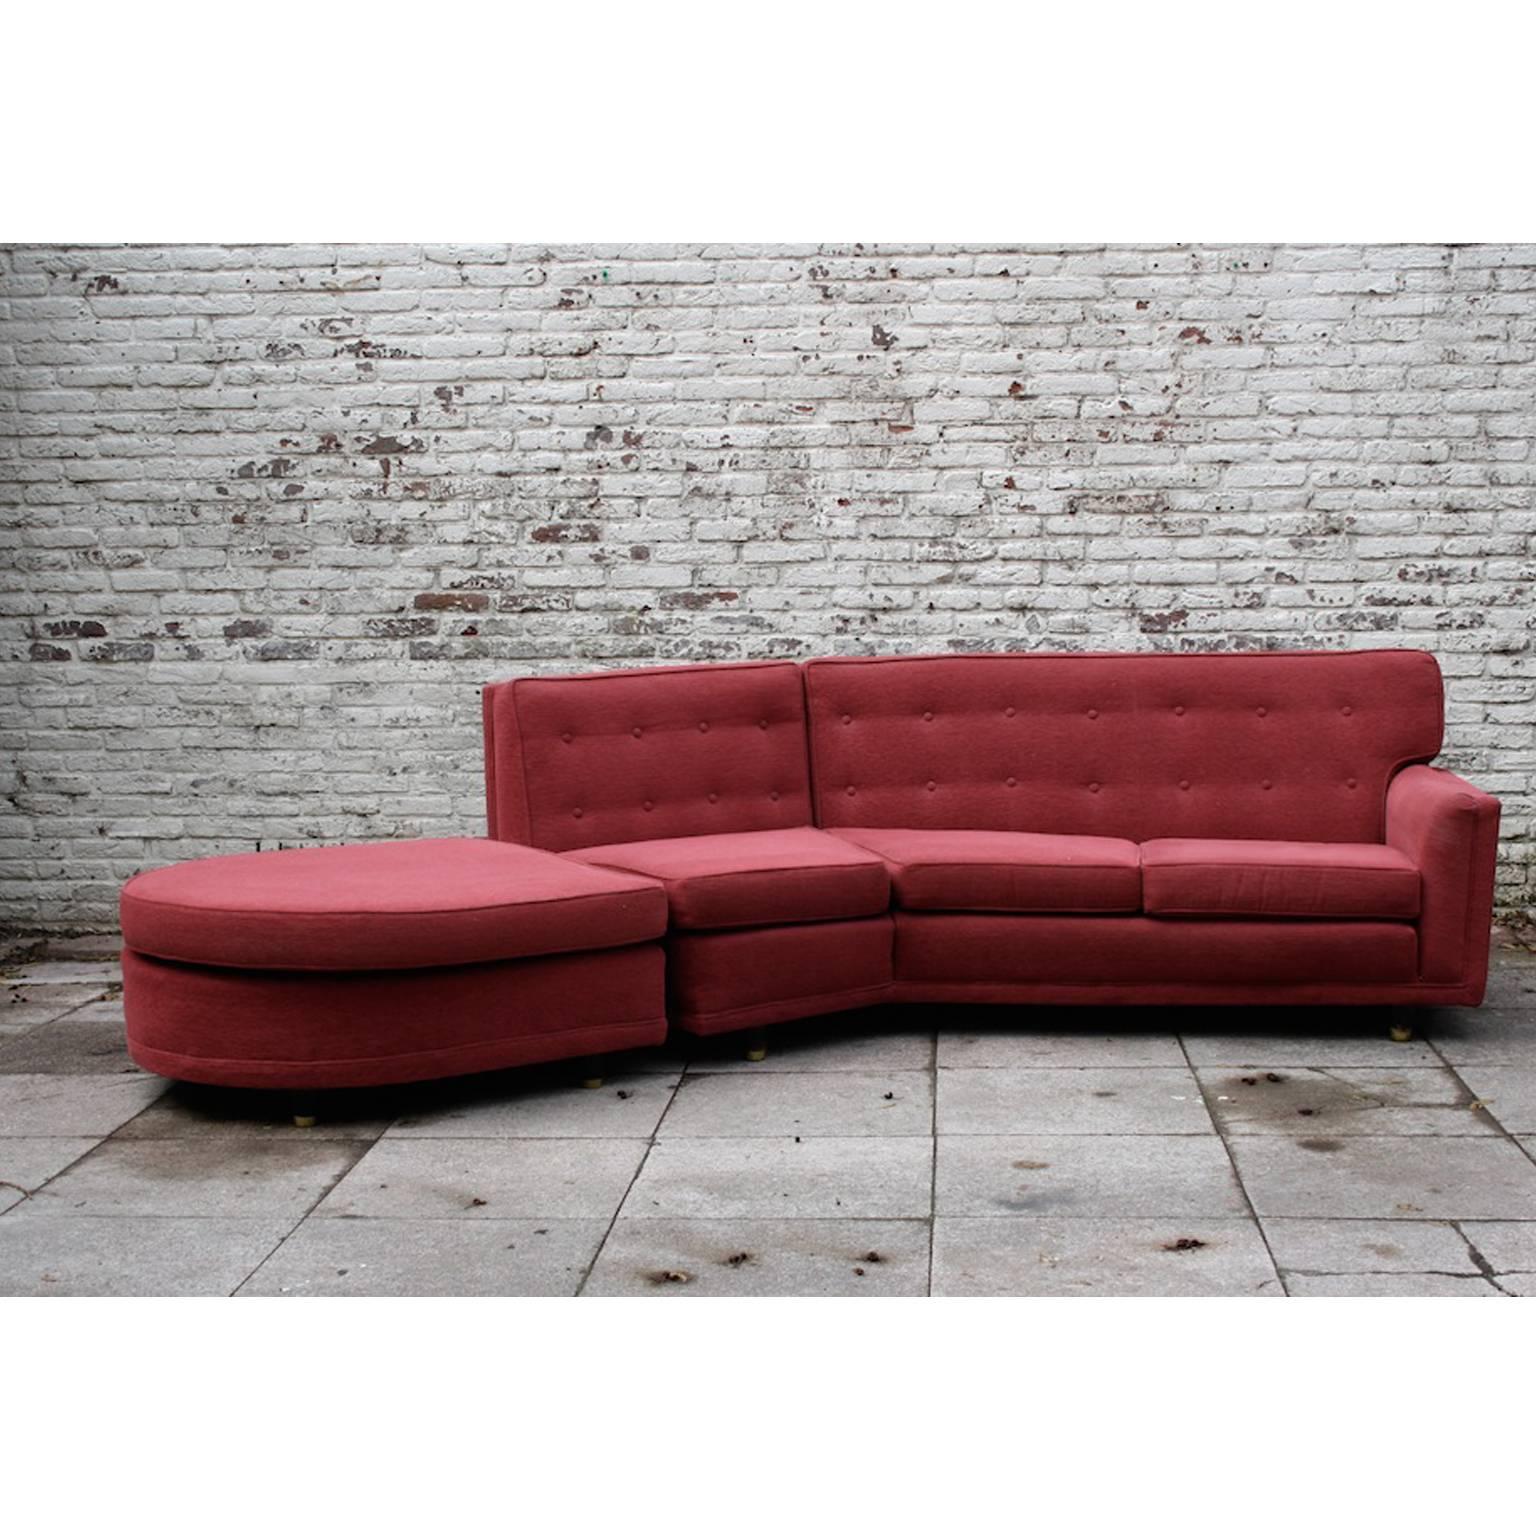 Large and stylish sofa, model K'ang, made by British furniture maker G-Plan. The original brochure speaks of a sofa inspired by Chinese designs.

The sofa has a nice angle with an extension part that could also be used a an ottoman.

Sofa is in